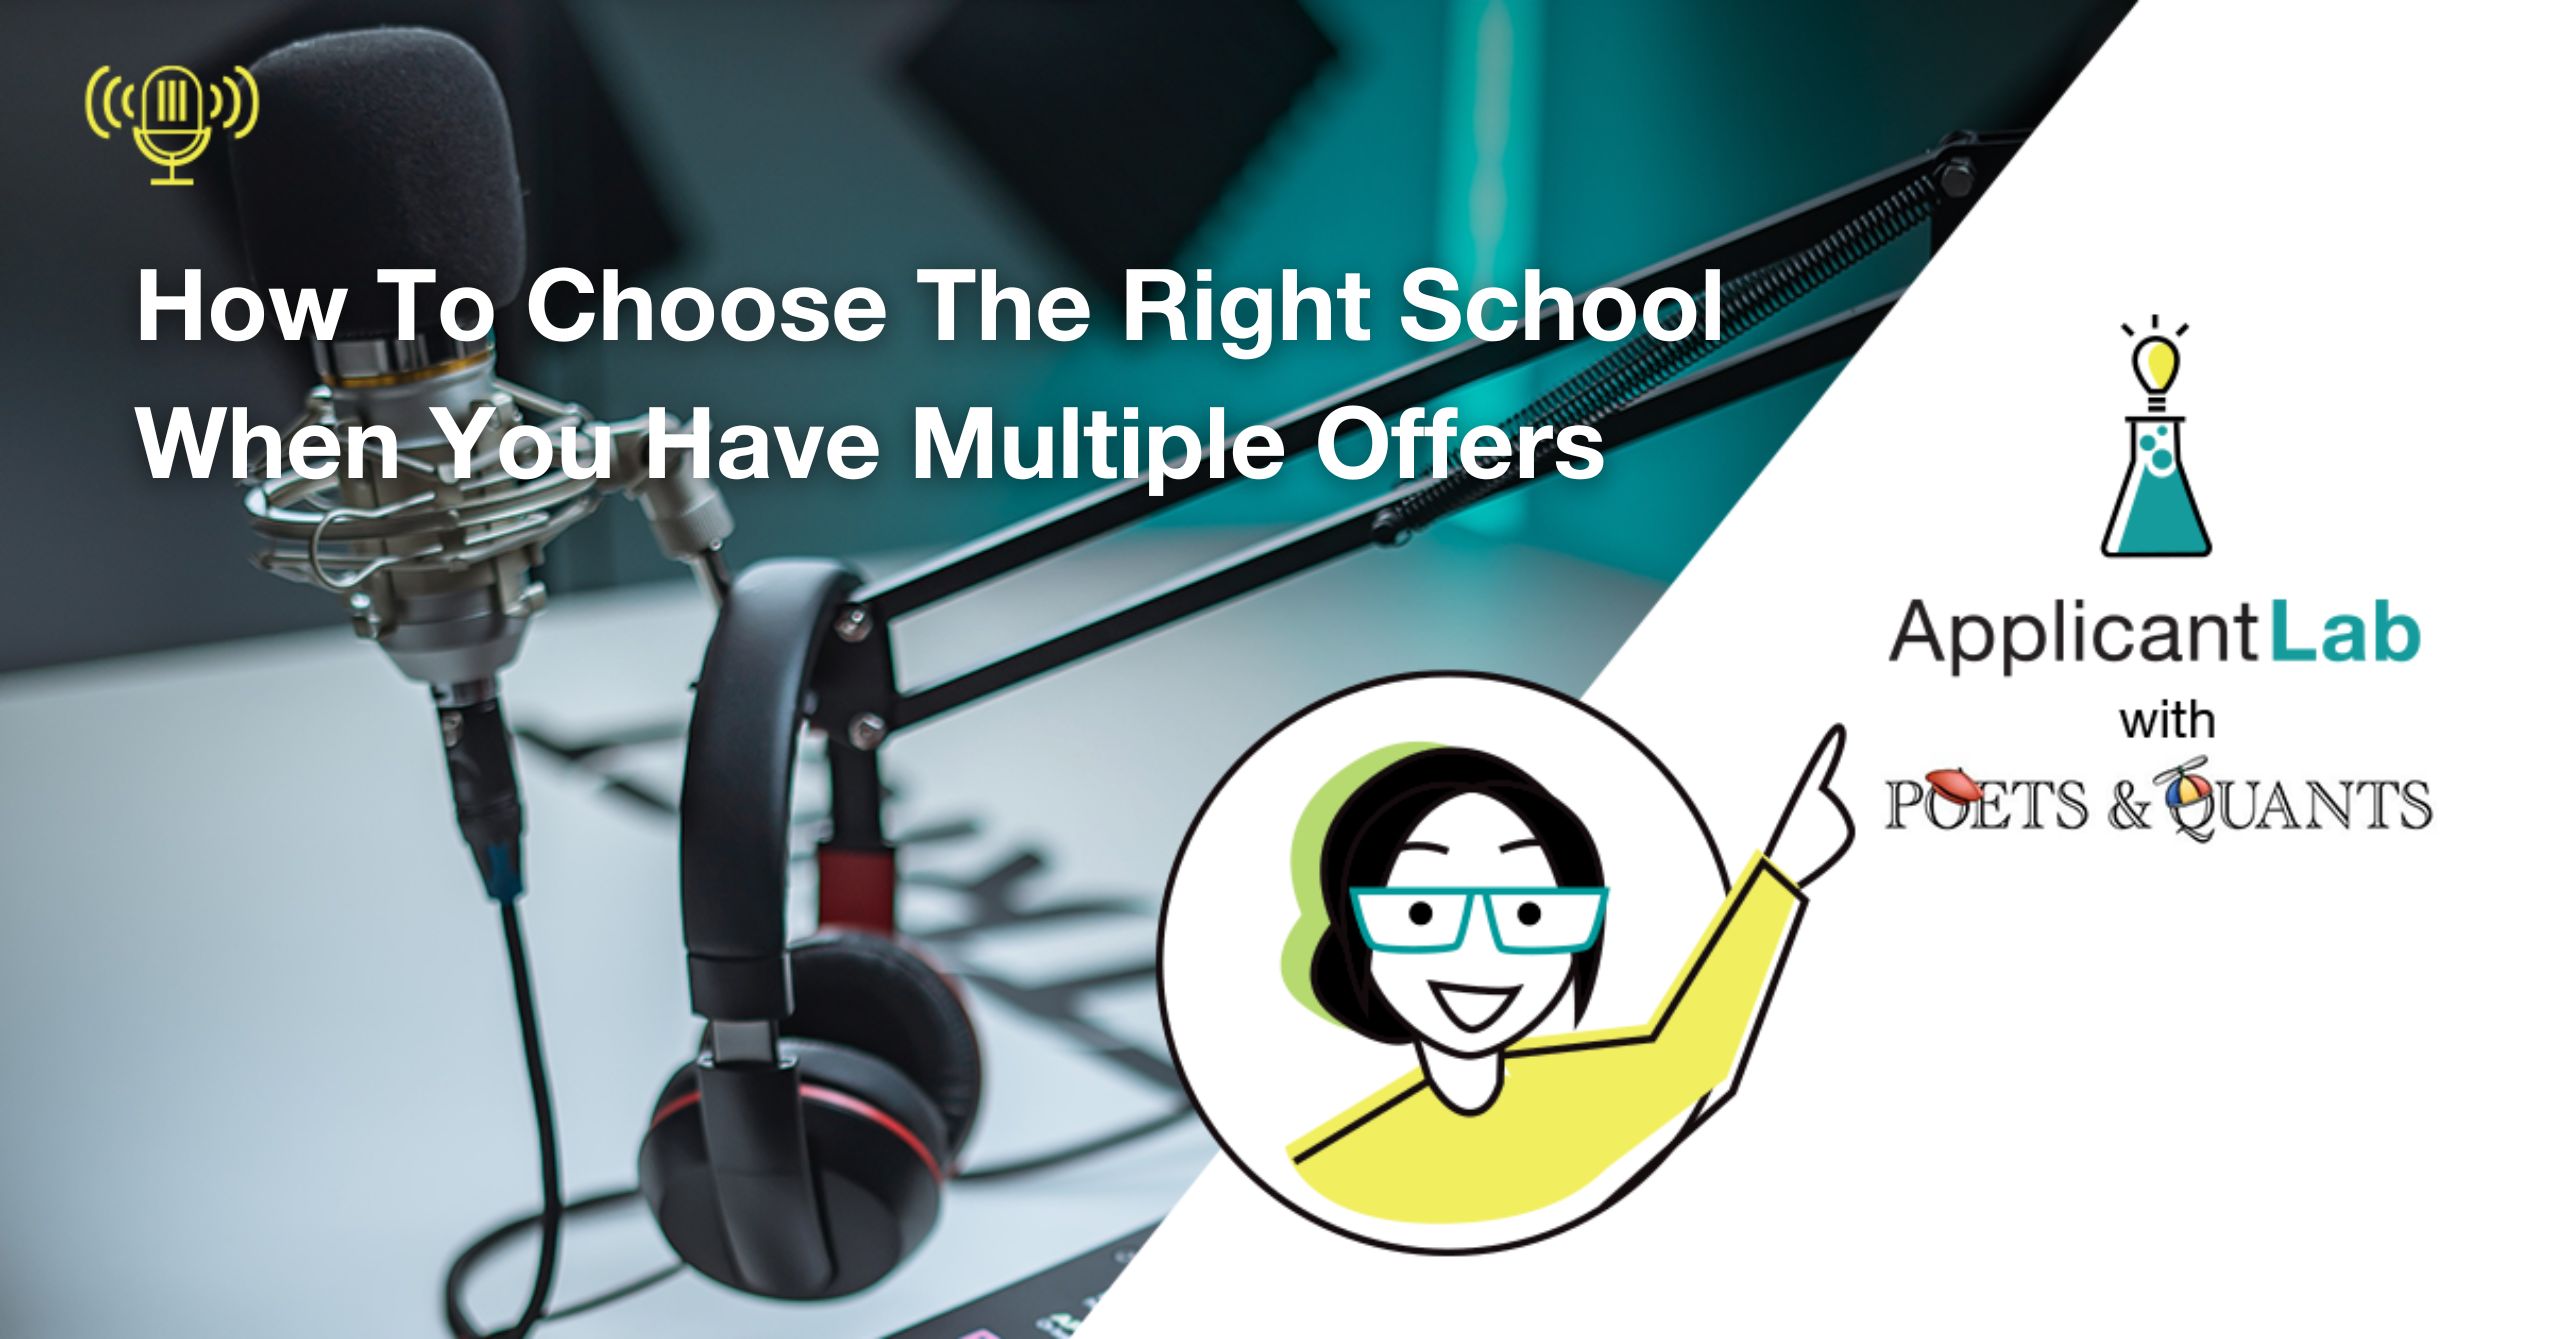 How To Choose The Right School When You Have Multiple Offers